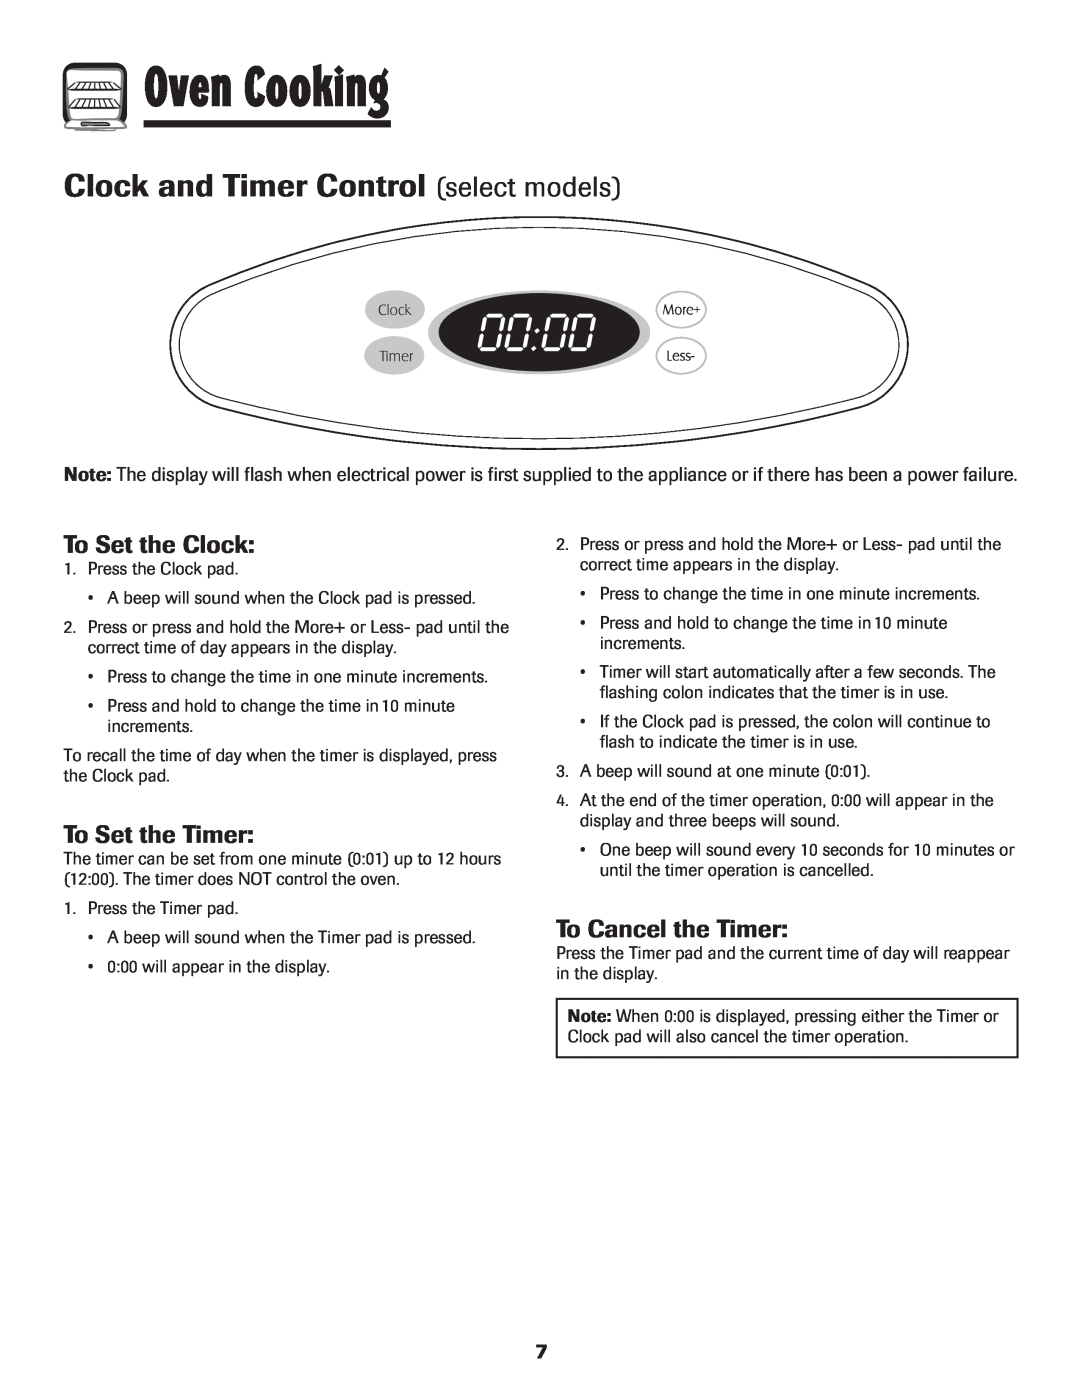 Maytag 8113P424-60 manual Oven Cooking, Clock and Timer Control select models, To Set the Clock, To Set the Timer 